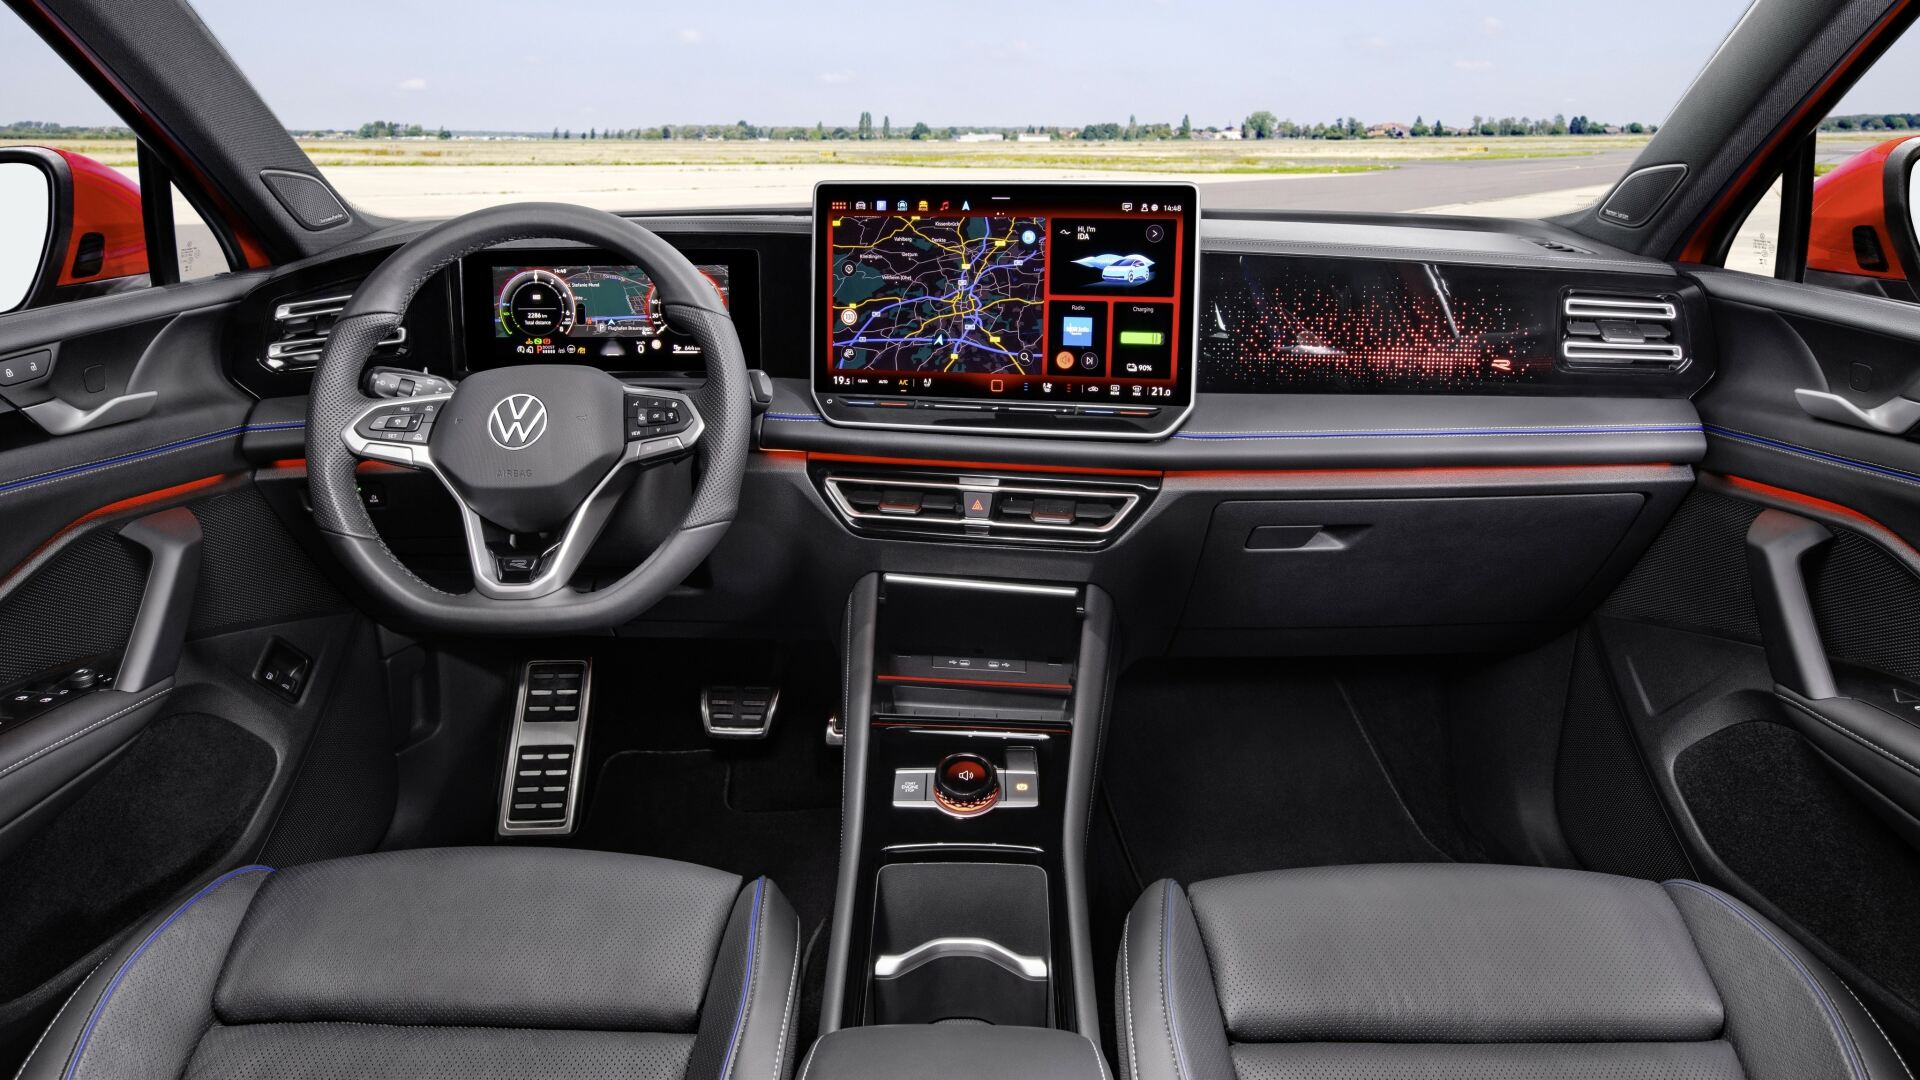 The Interior, Steering, Dashboard, And Central Console Of A 2025 Volkswagen Tiguan (Credits Volkswagen)